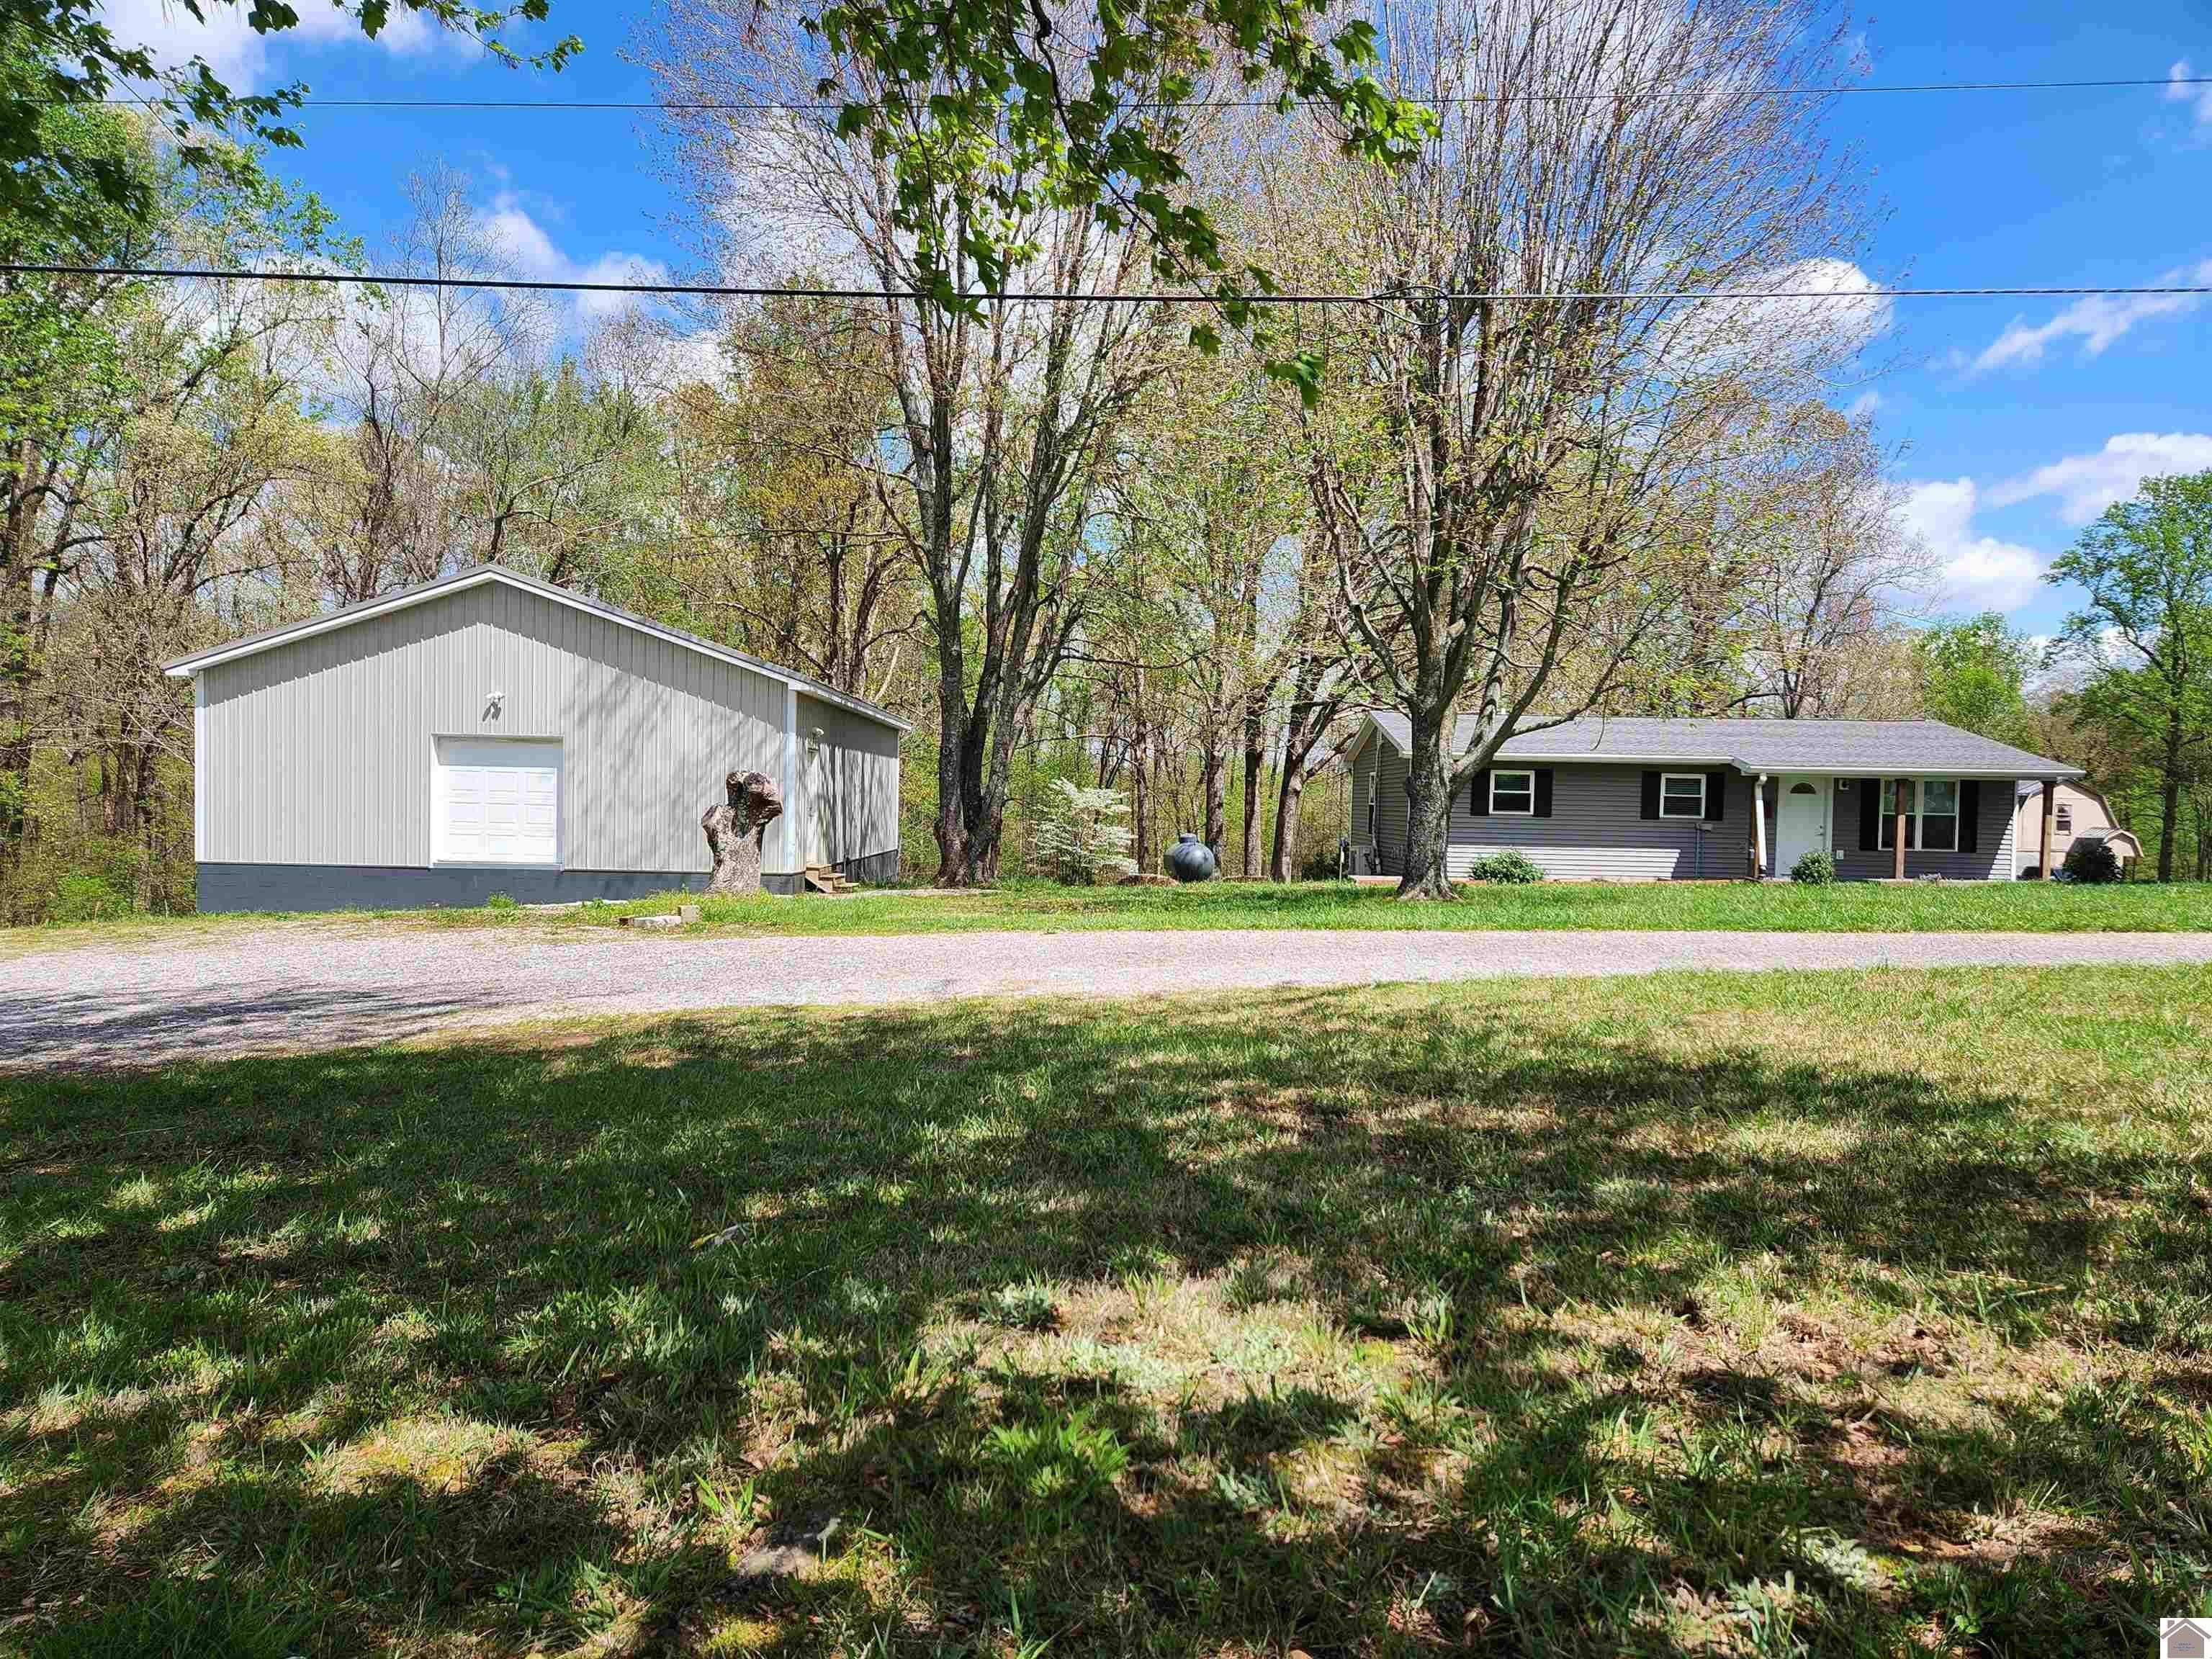 740 Dover, 126345, Grand Rivers, Single Family,  for sale, The Vince Carter Team at Carter Realty Group, LLC